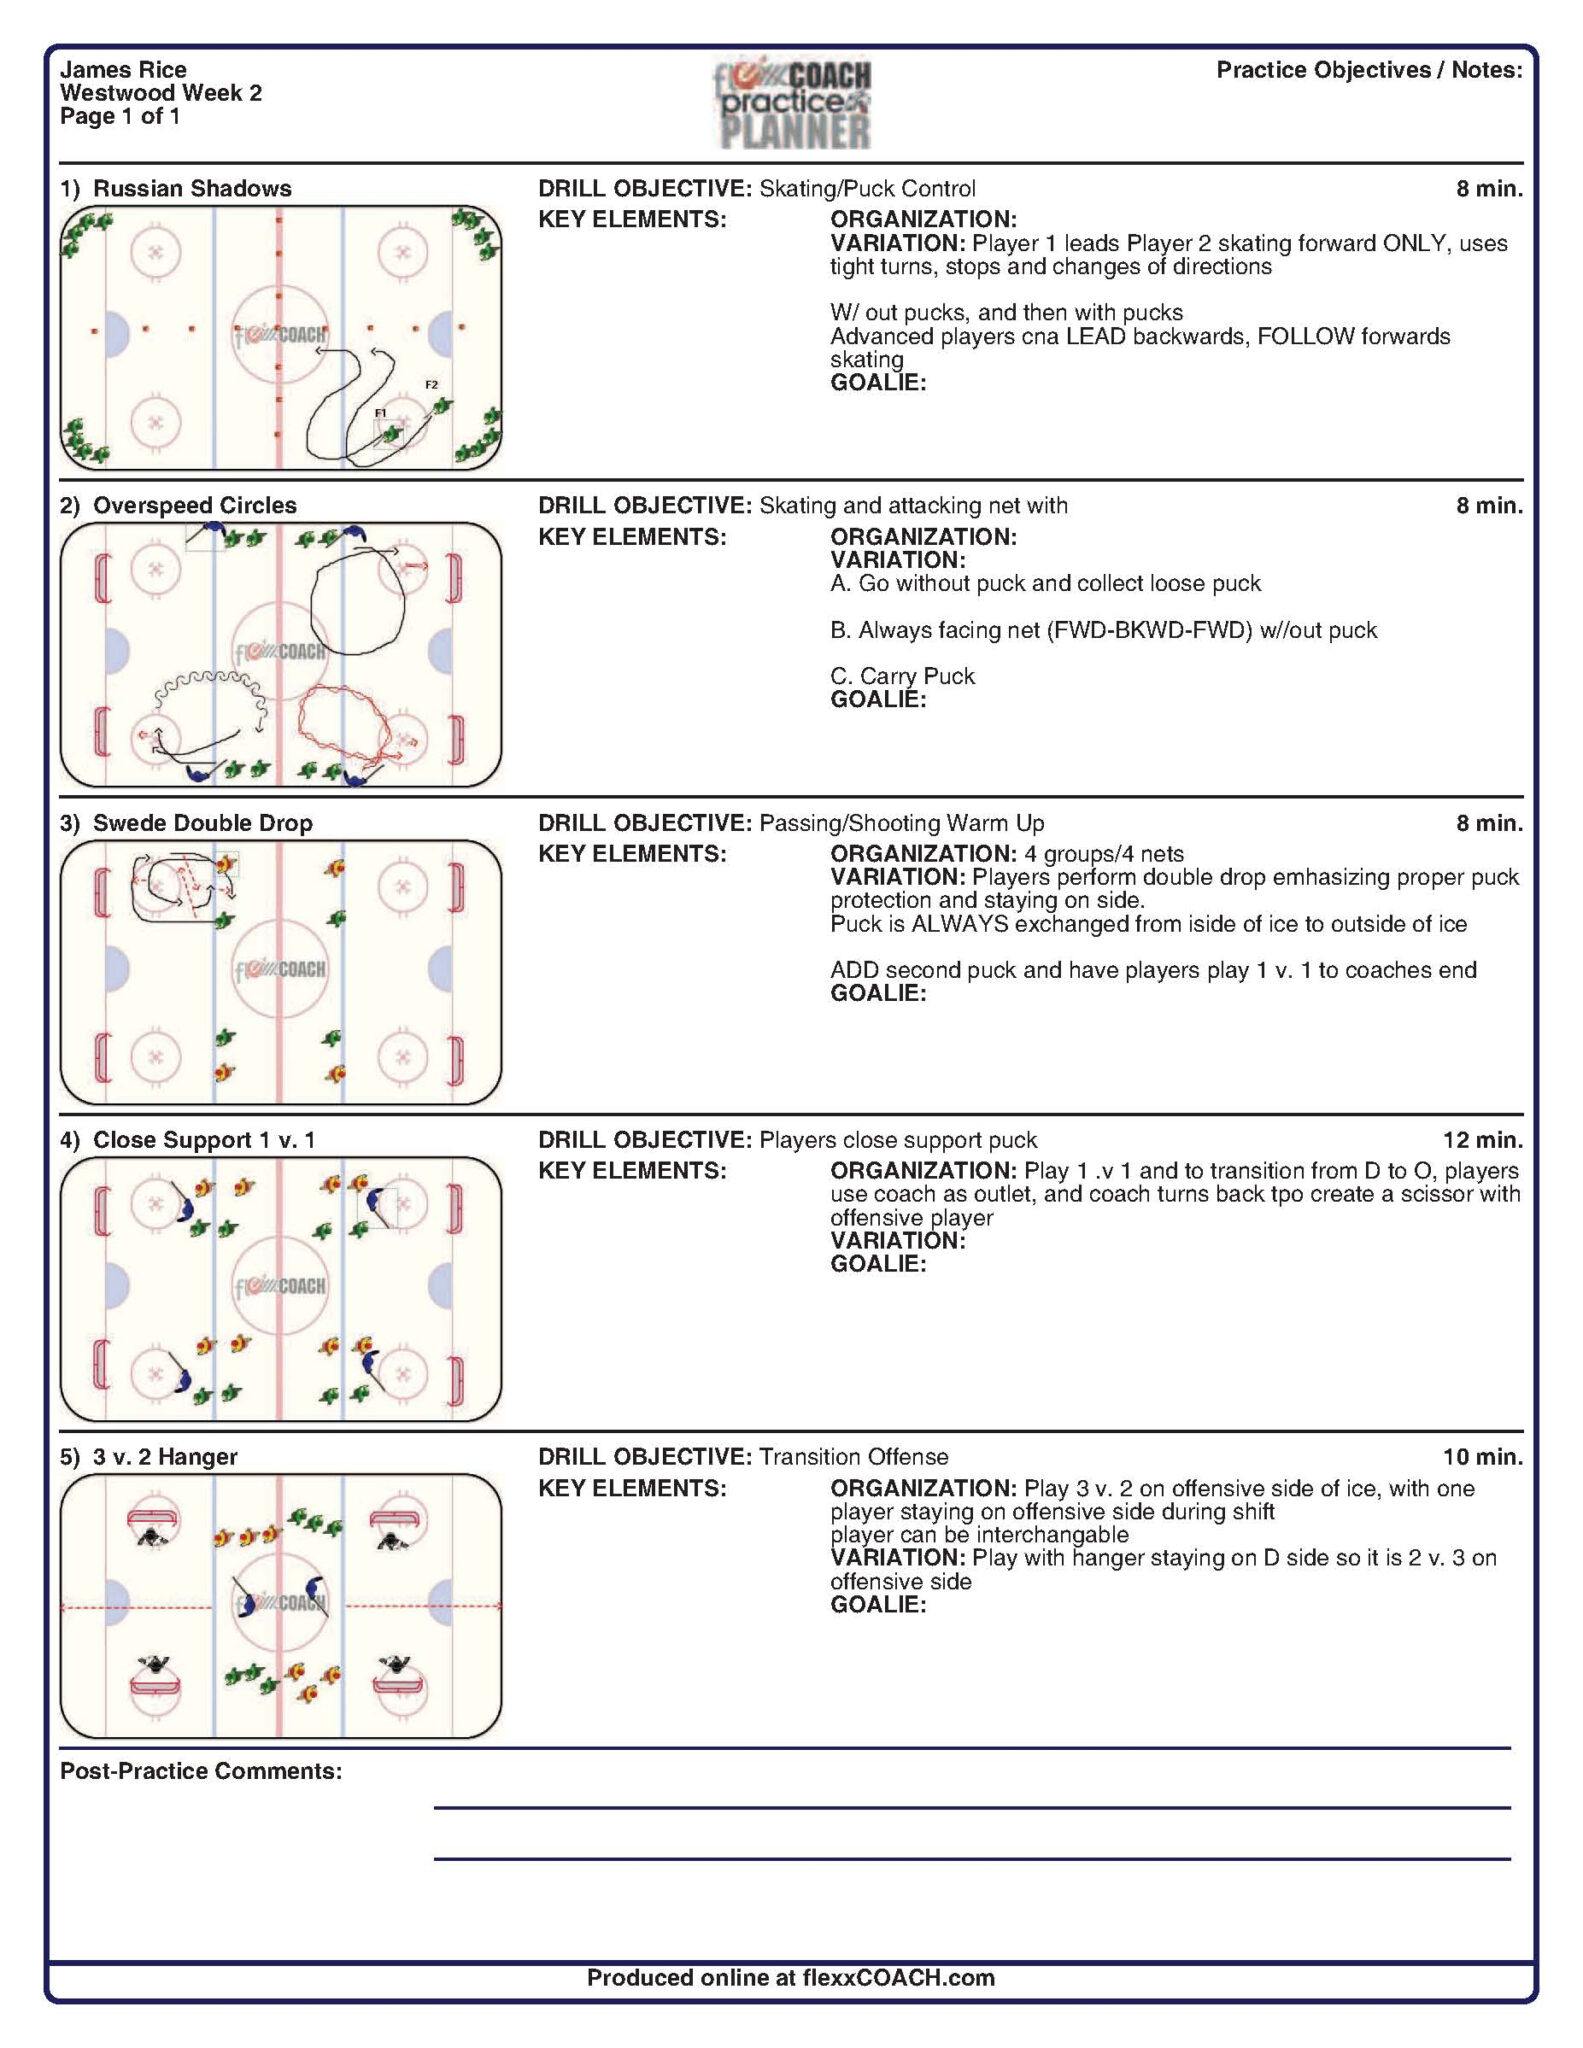 drill-exchange-with-blank-hockey-practice-plan-template-professional-template